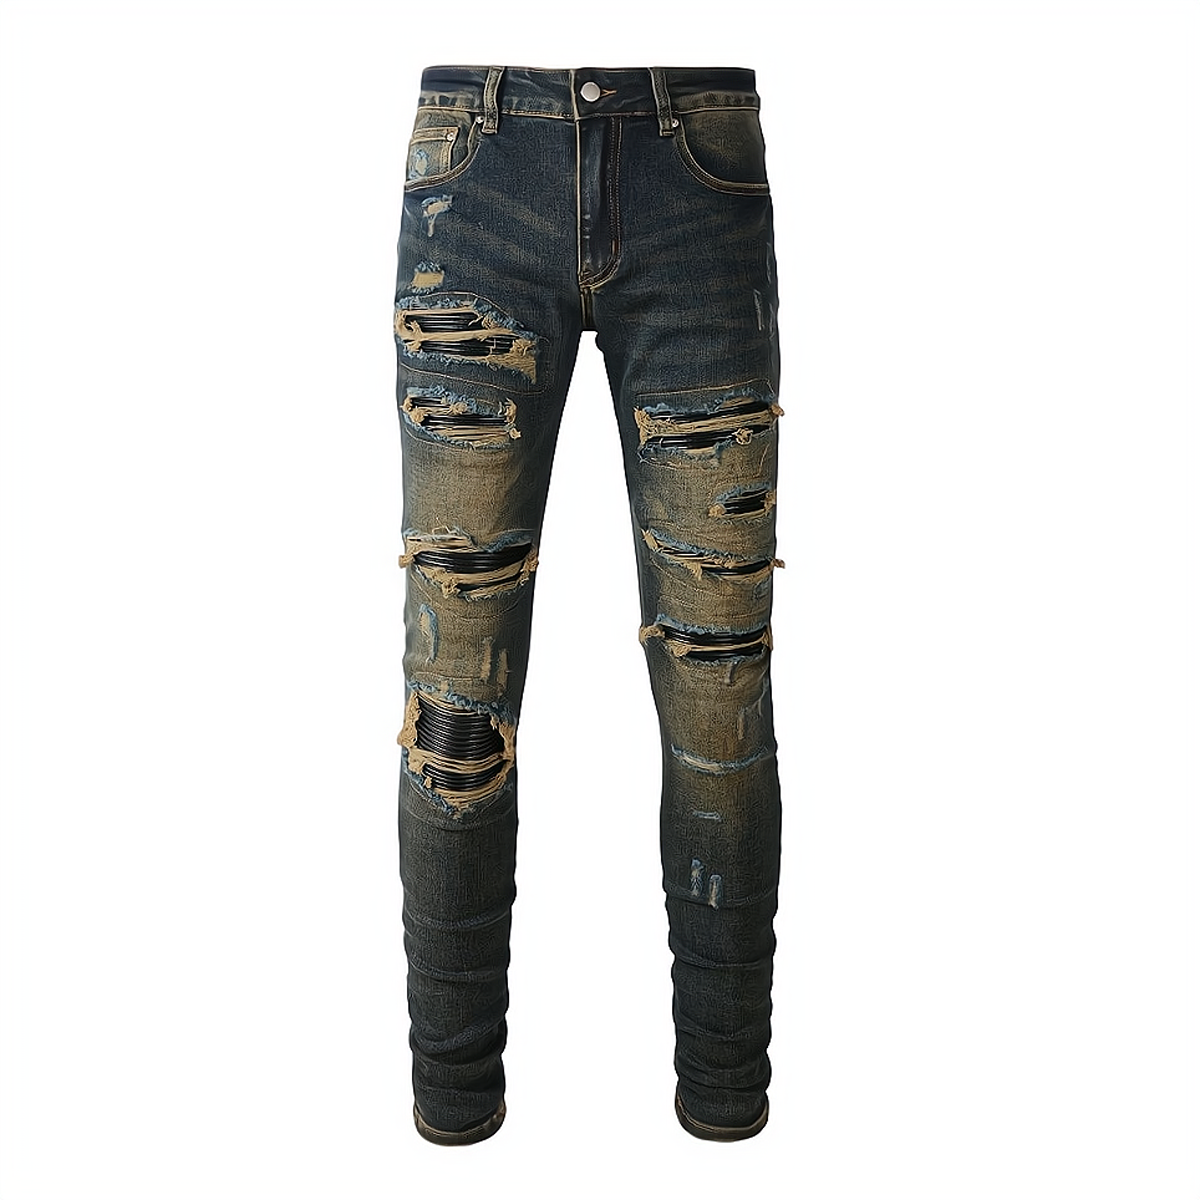 Ready To Take Over Skinny Jeans - Medium Wash